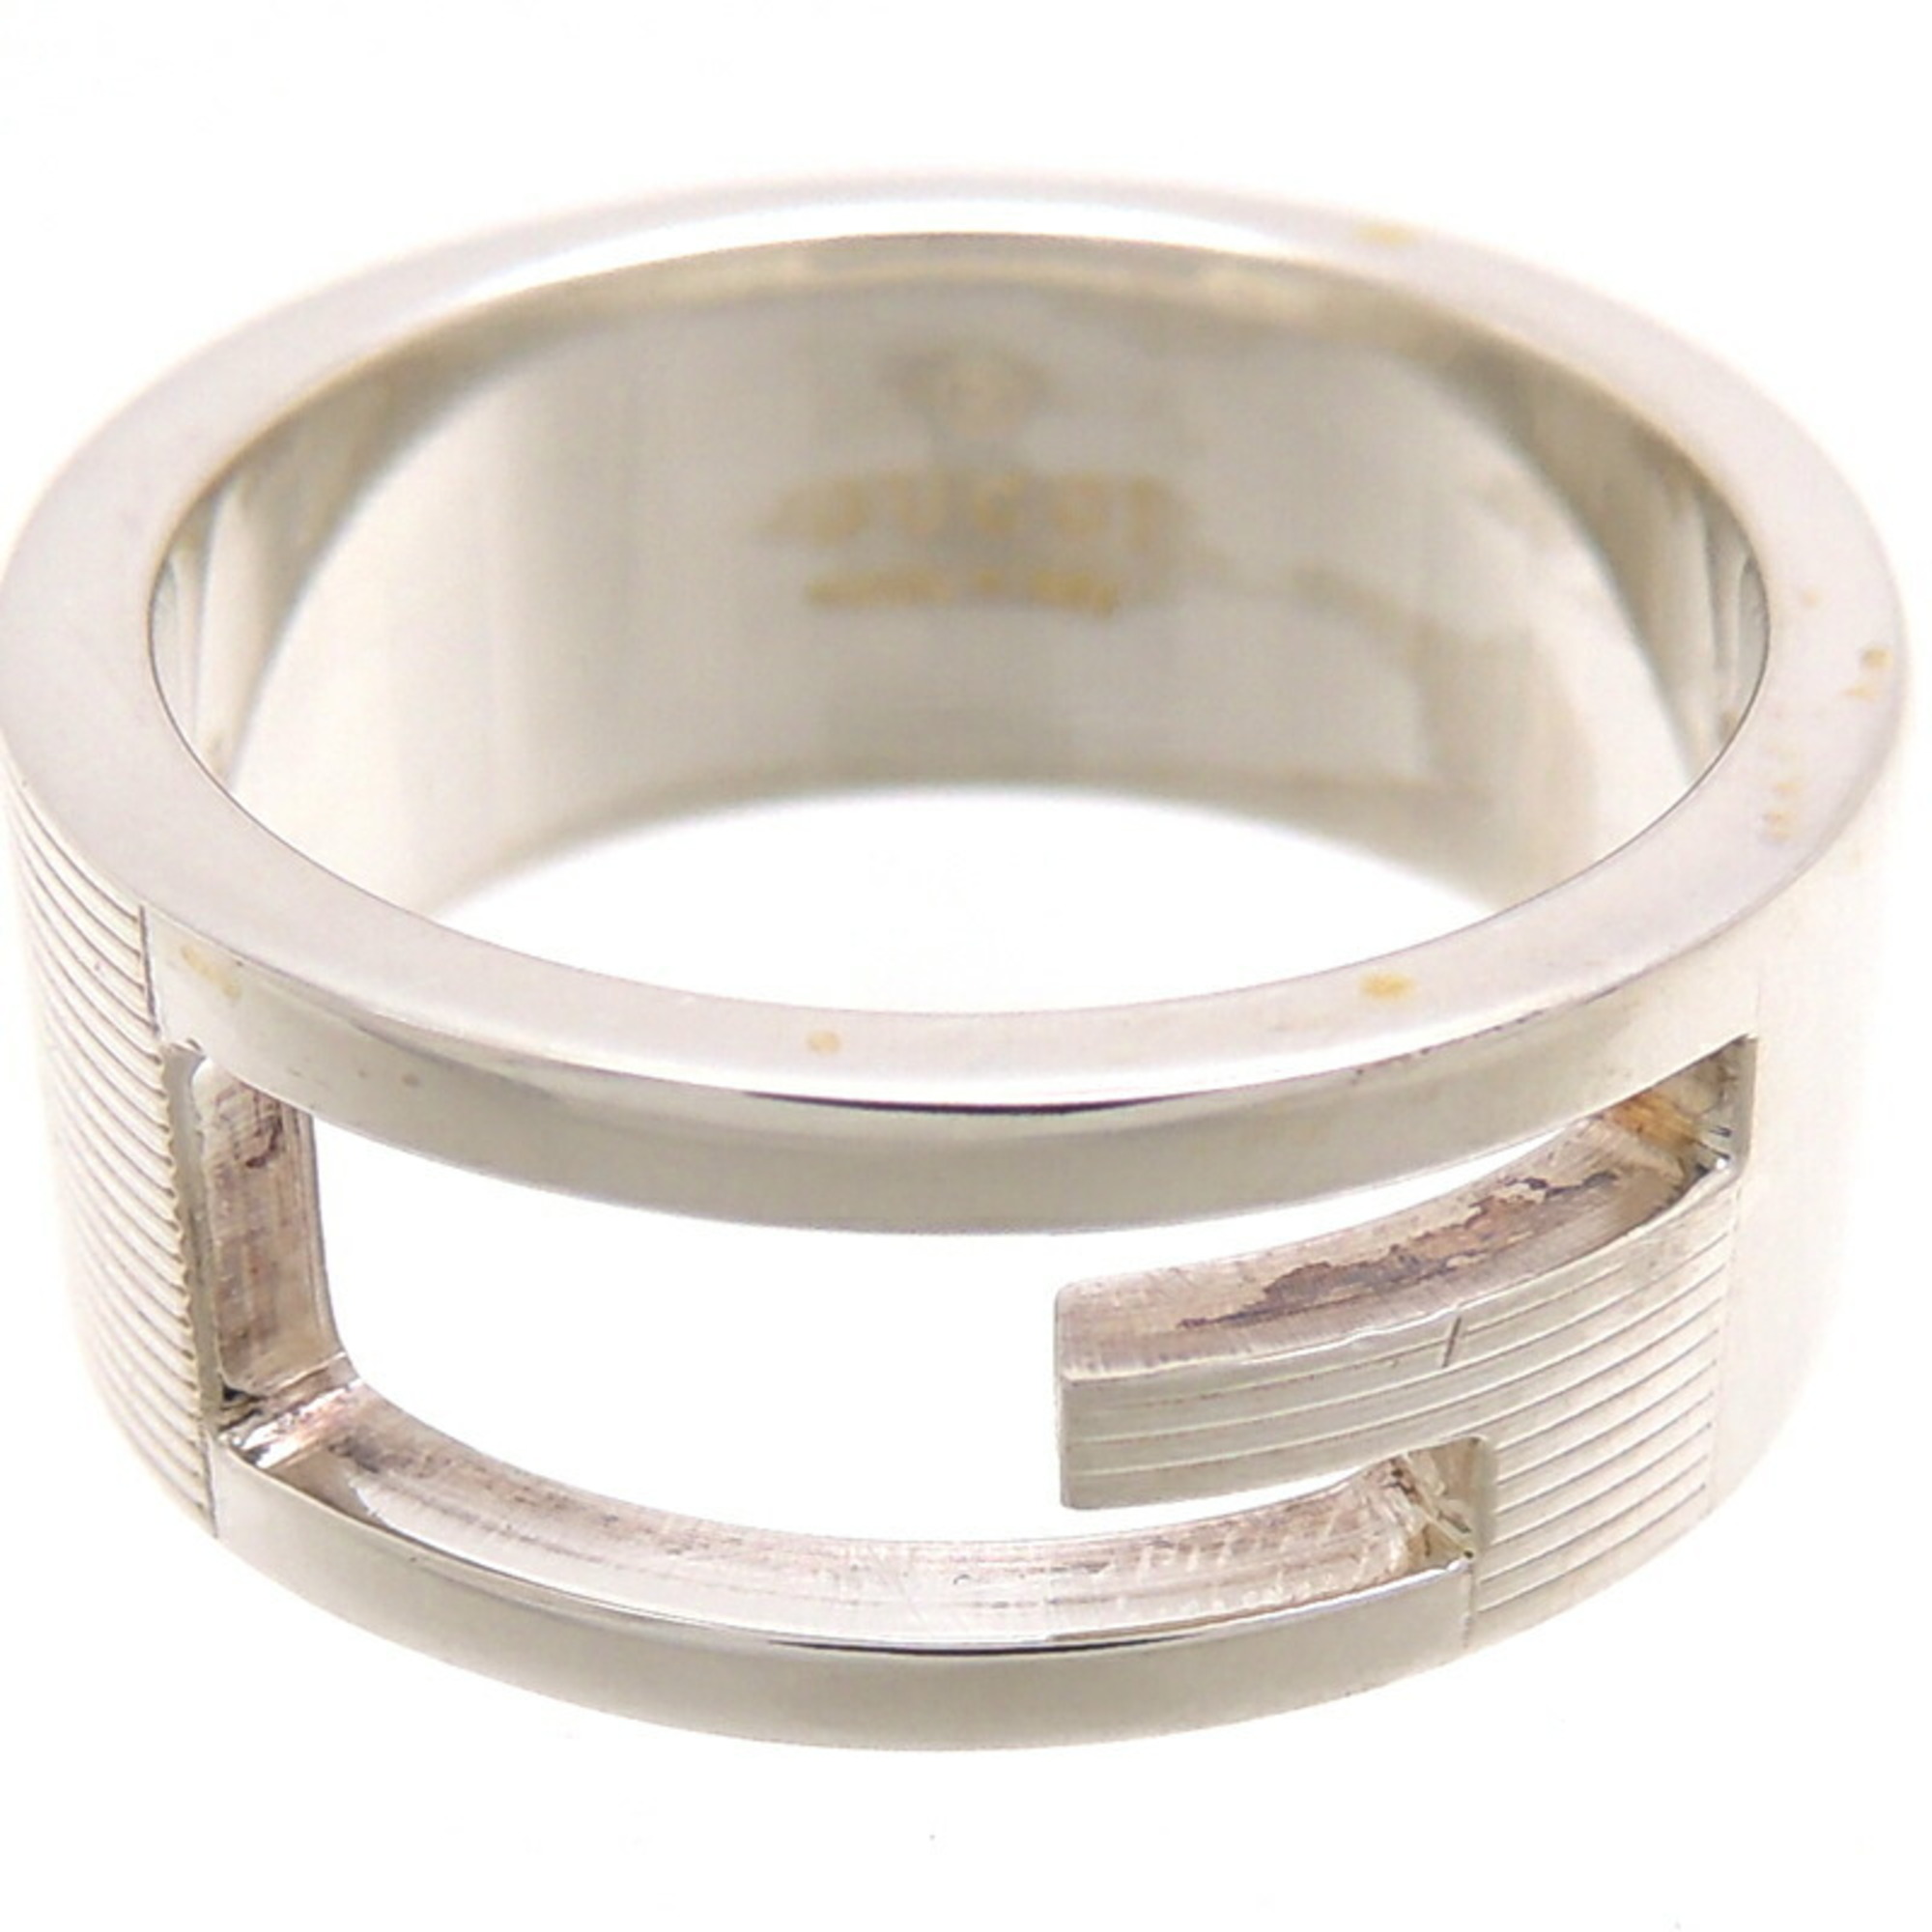 Gucci SV925 G Women's/Men's Ring Silver 925 No. 13